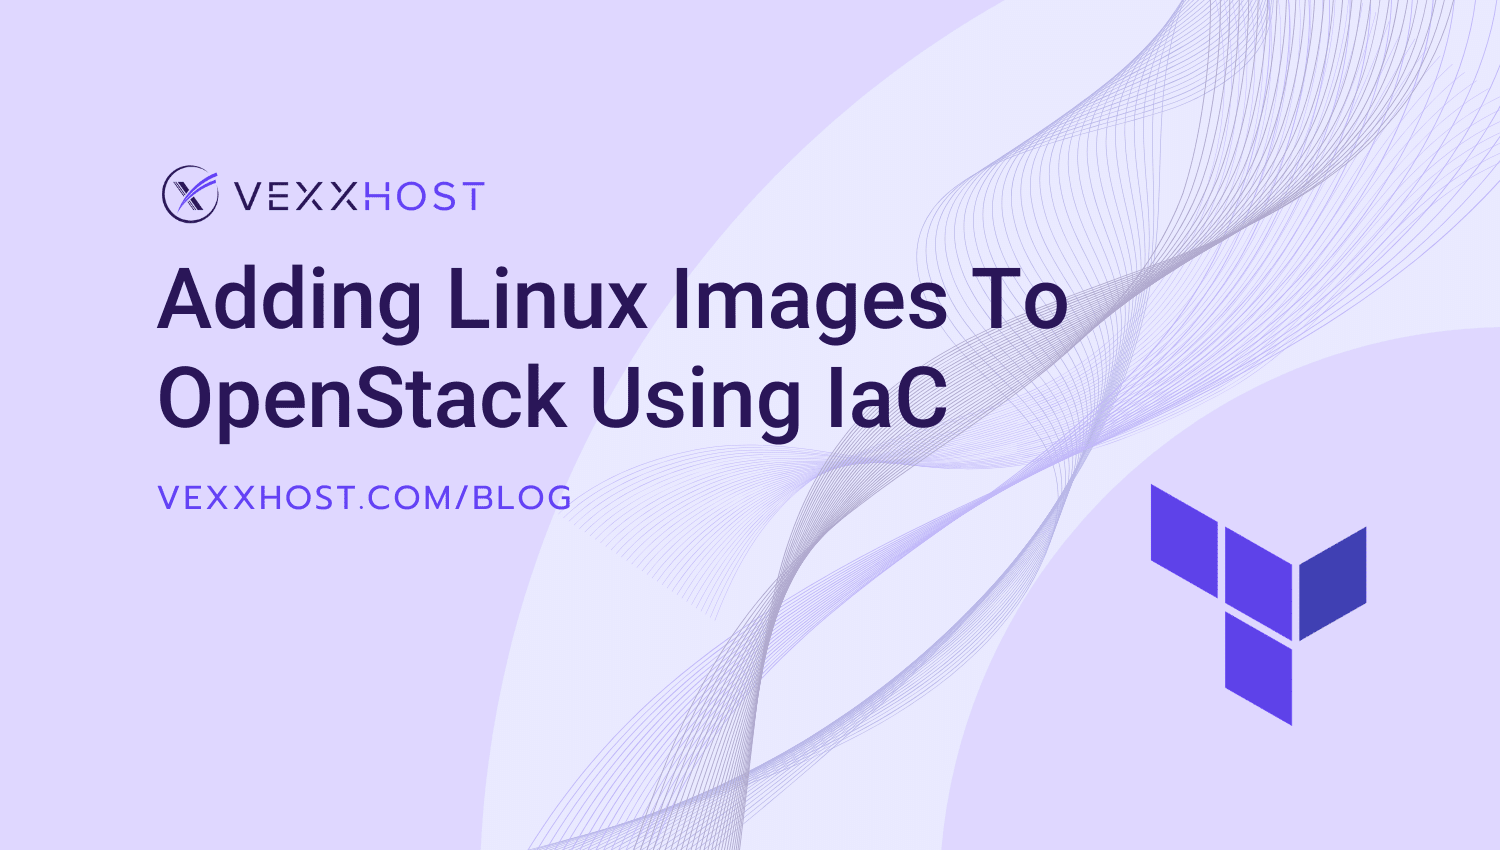 Adding Linux Images to OpenStack Using IaC 